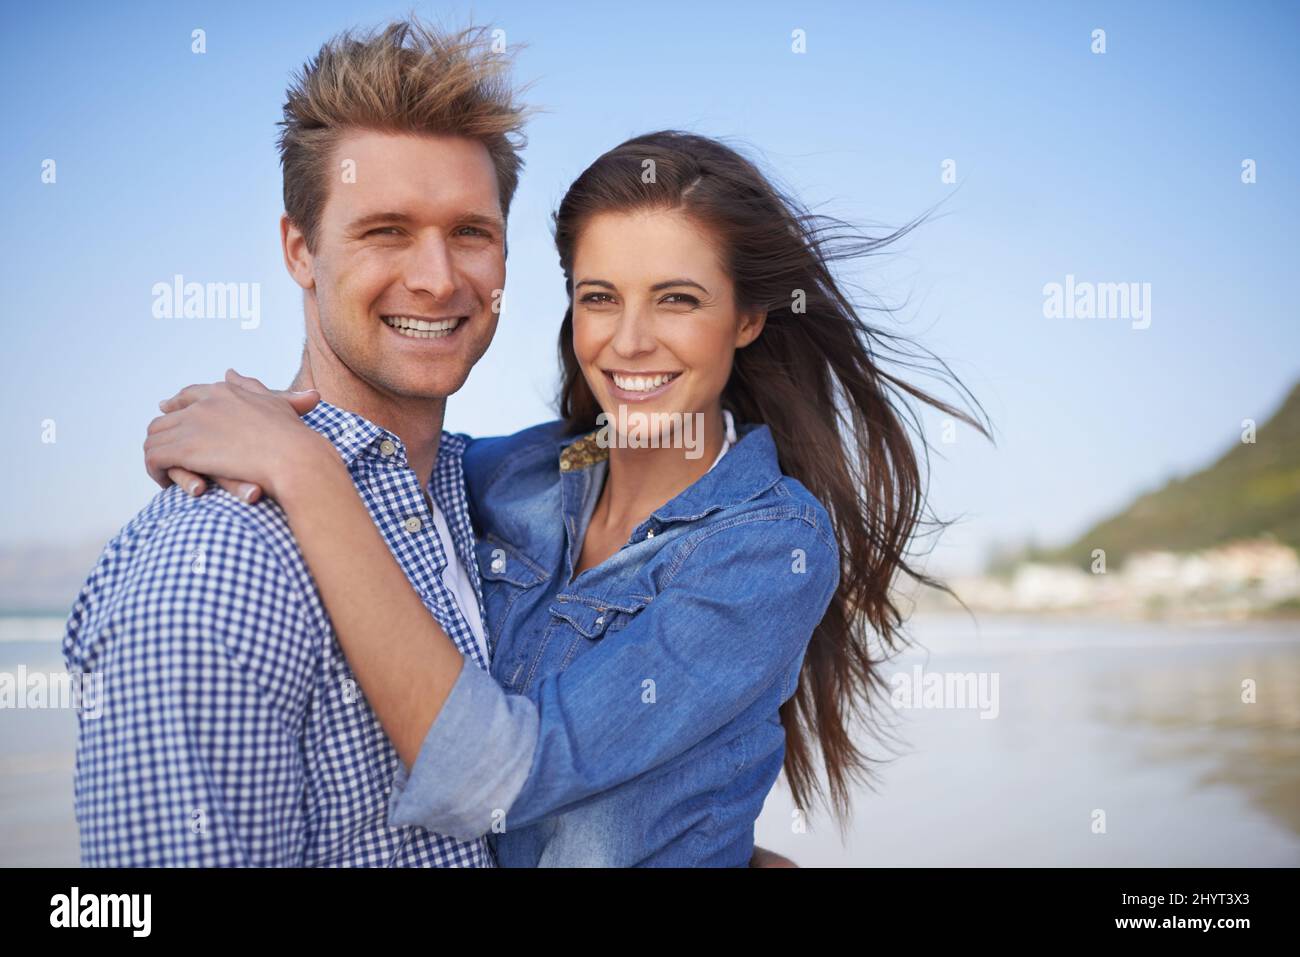 Our love is forever. A young couple embracing happily on the beach. Stock Photo